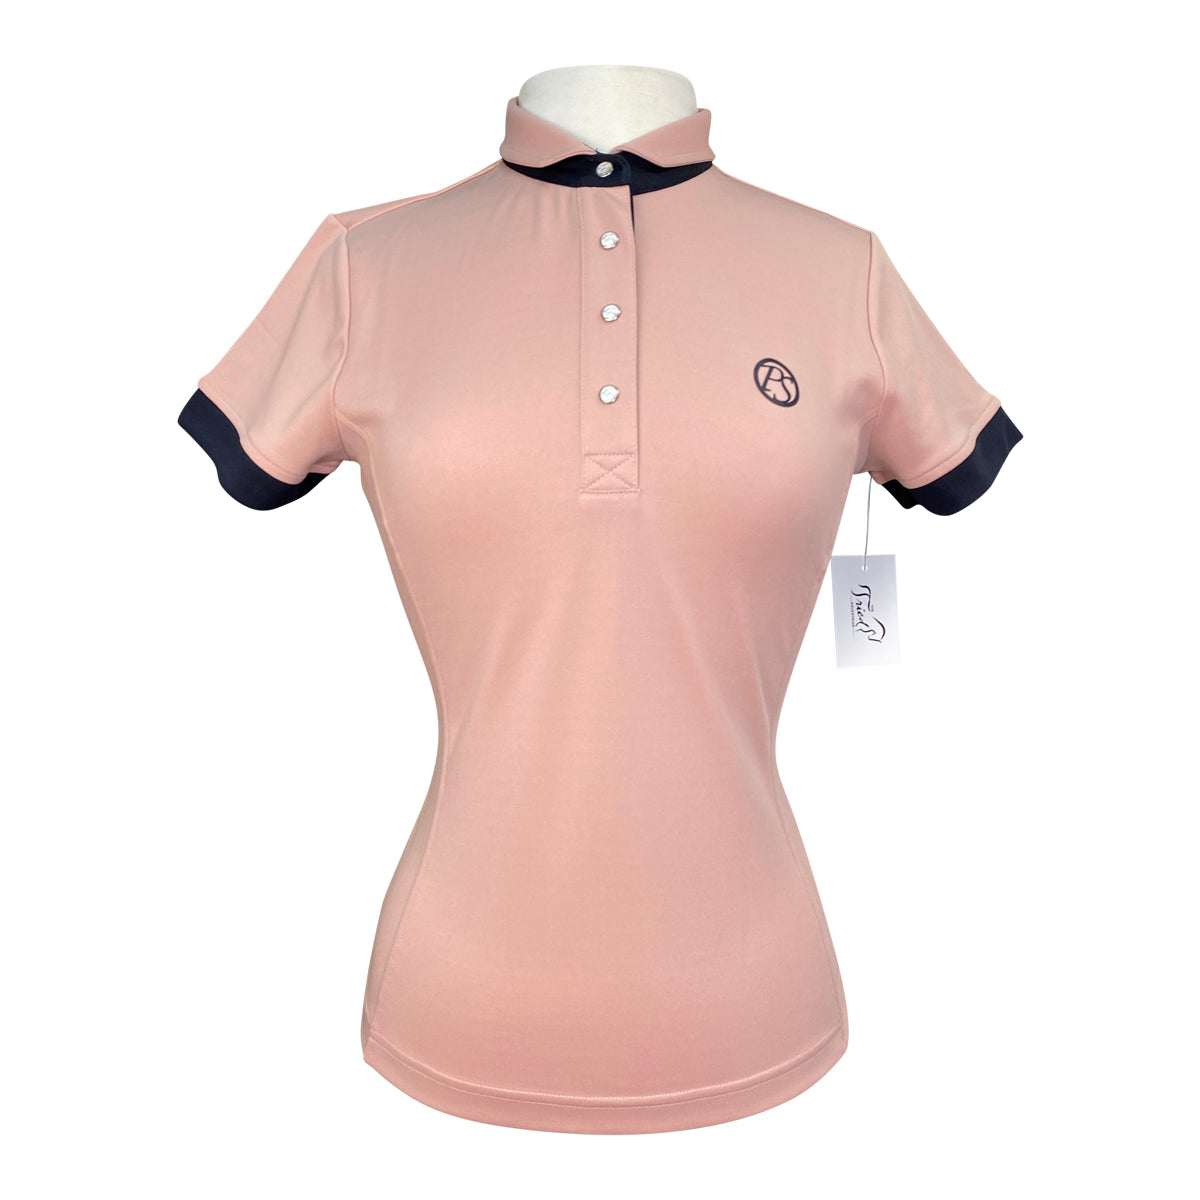 PS of Sweden 'Daniella' Polo Shirt in Pink